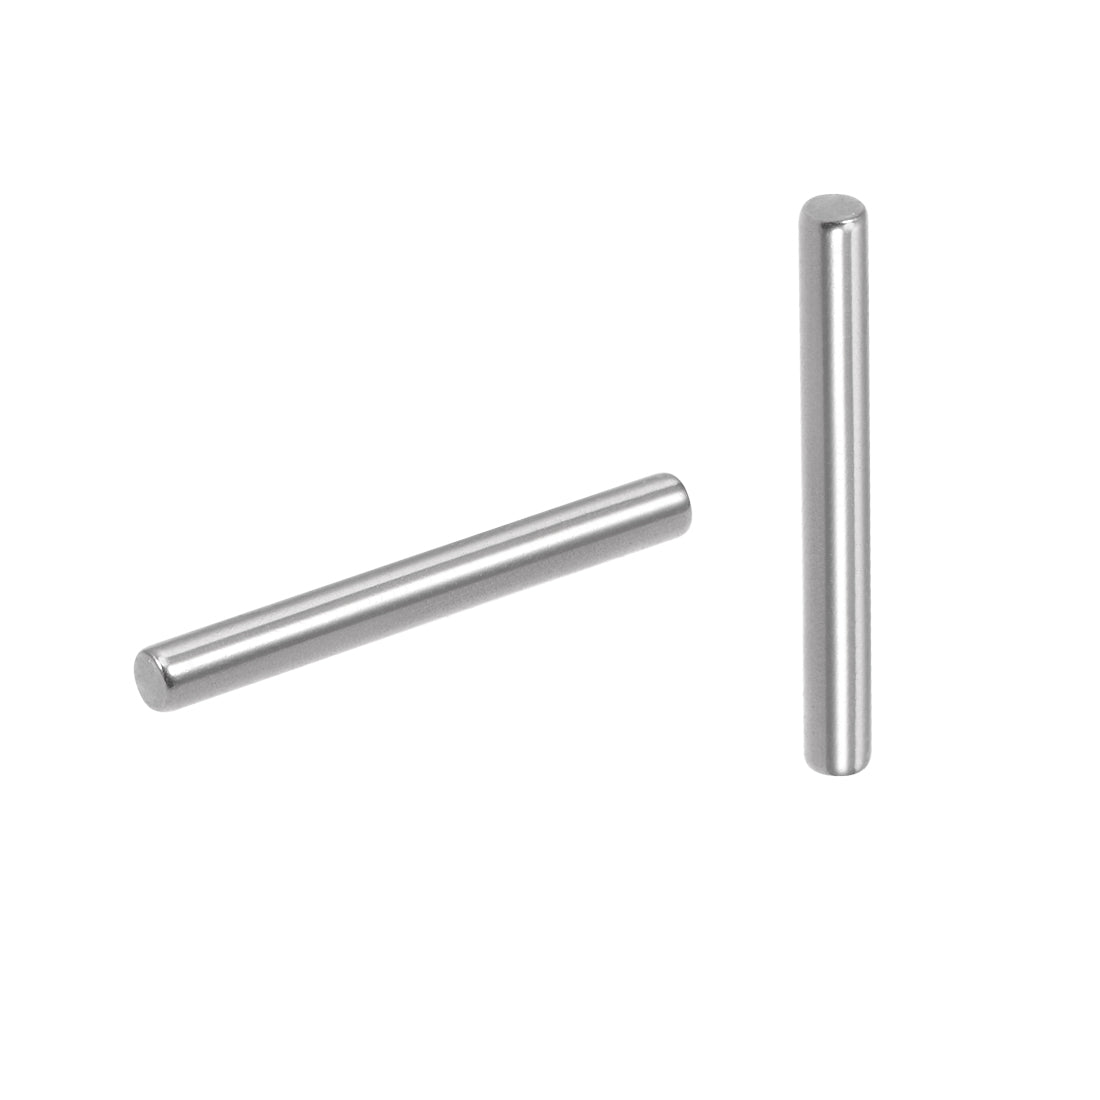 uxcell Uxcell 20Pcs 2mm x 18mm Dowel Pin 304 Stainless Steel Shelf Support Pin Fasten Elements Silver Tone